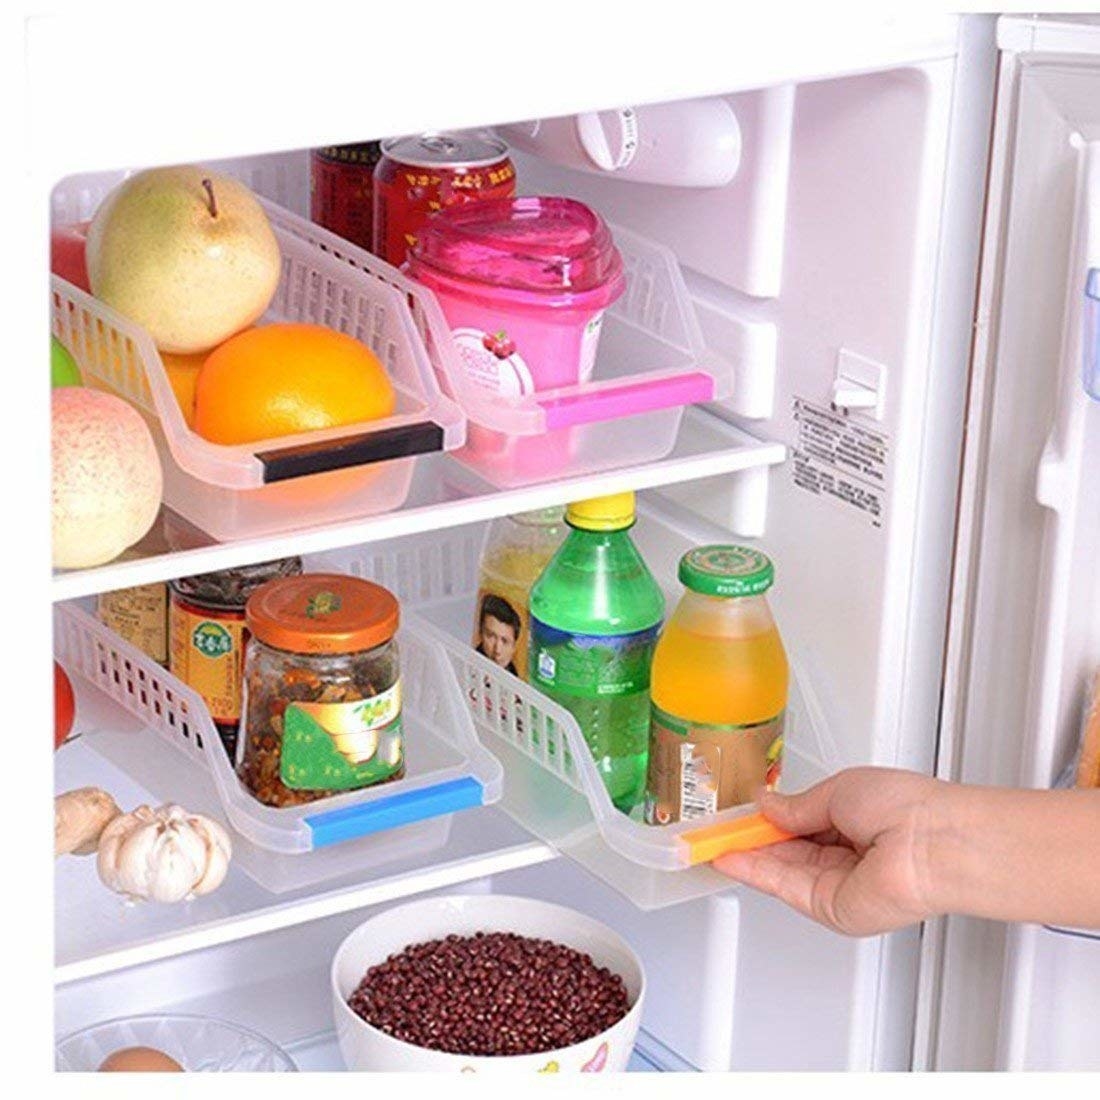 A set of fridge bins with food items in them and a hand pulling them out